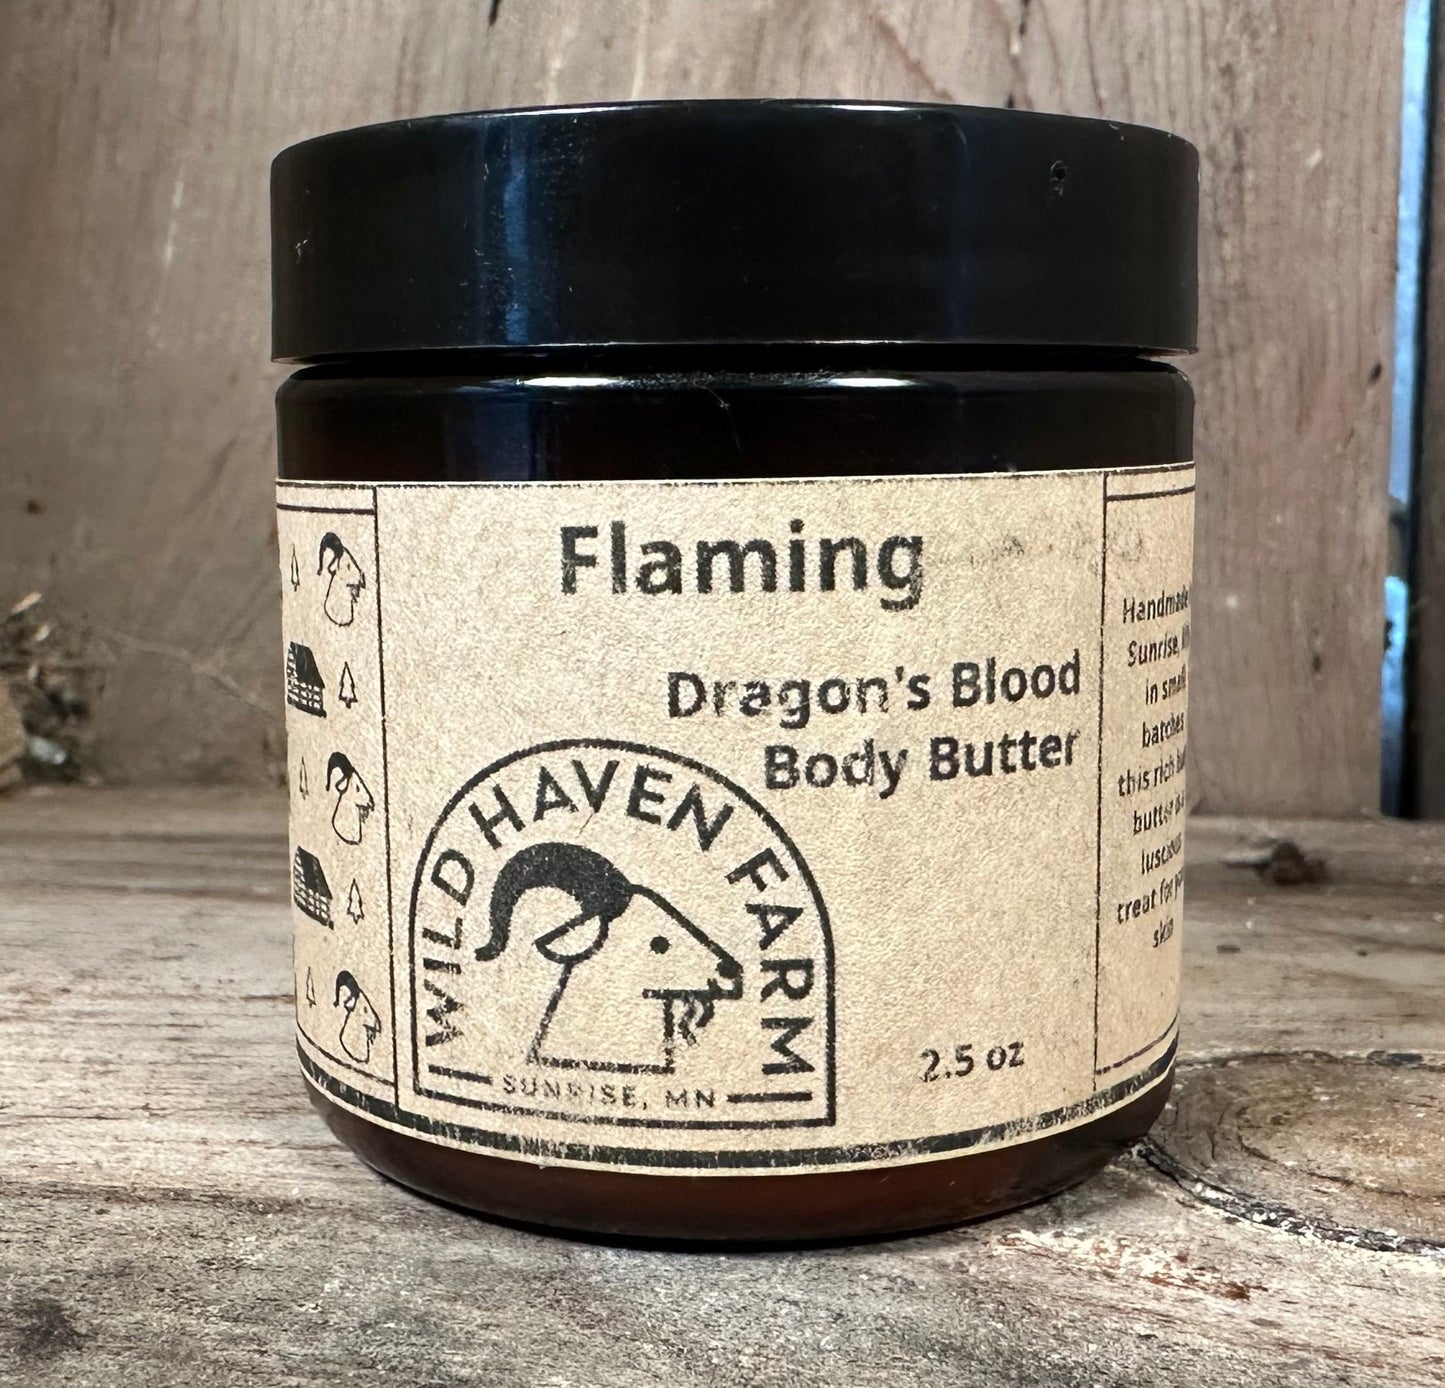 Jar of Wild Haven Farm's Flaming Dragon's Blood Body Butter